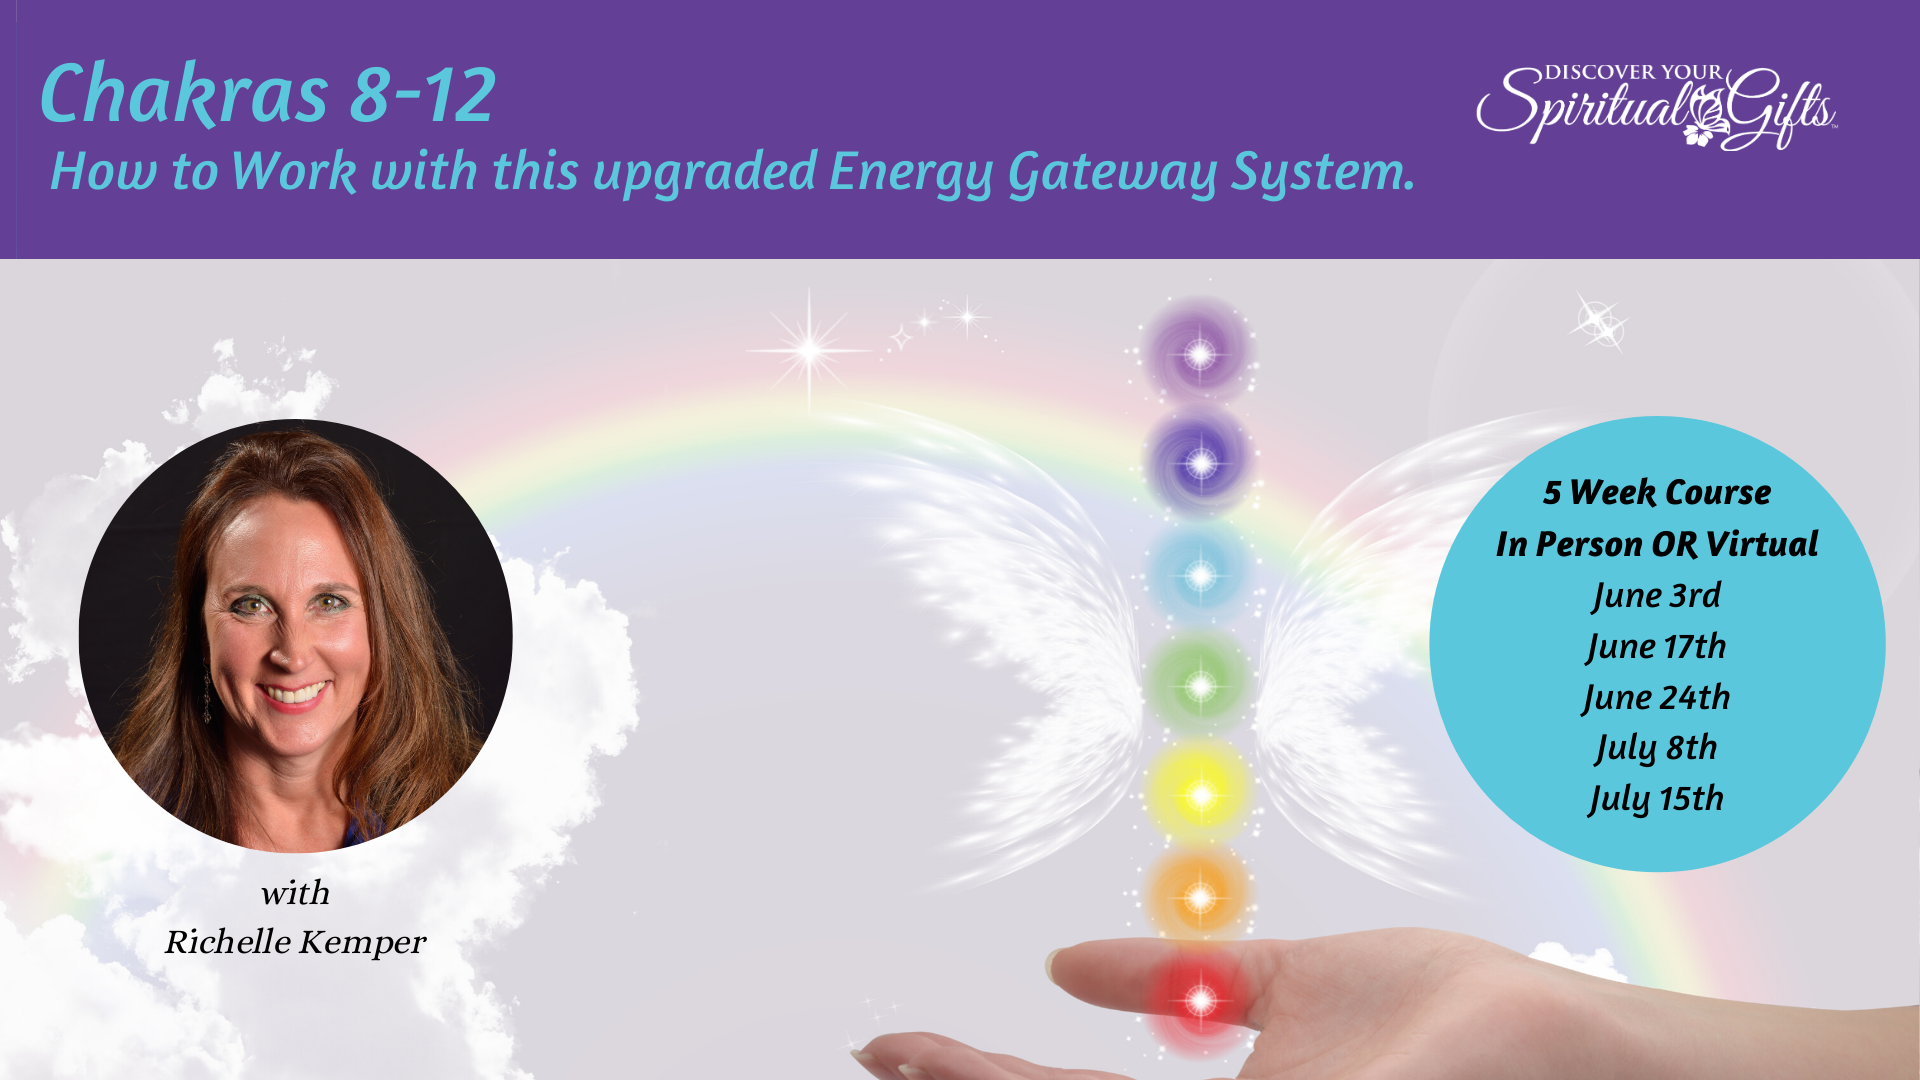 Chakras 8-12, How to Work with this Upgraded Energy System Gateway (1 of 5)